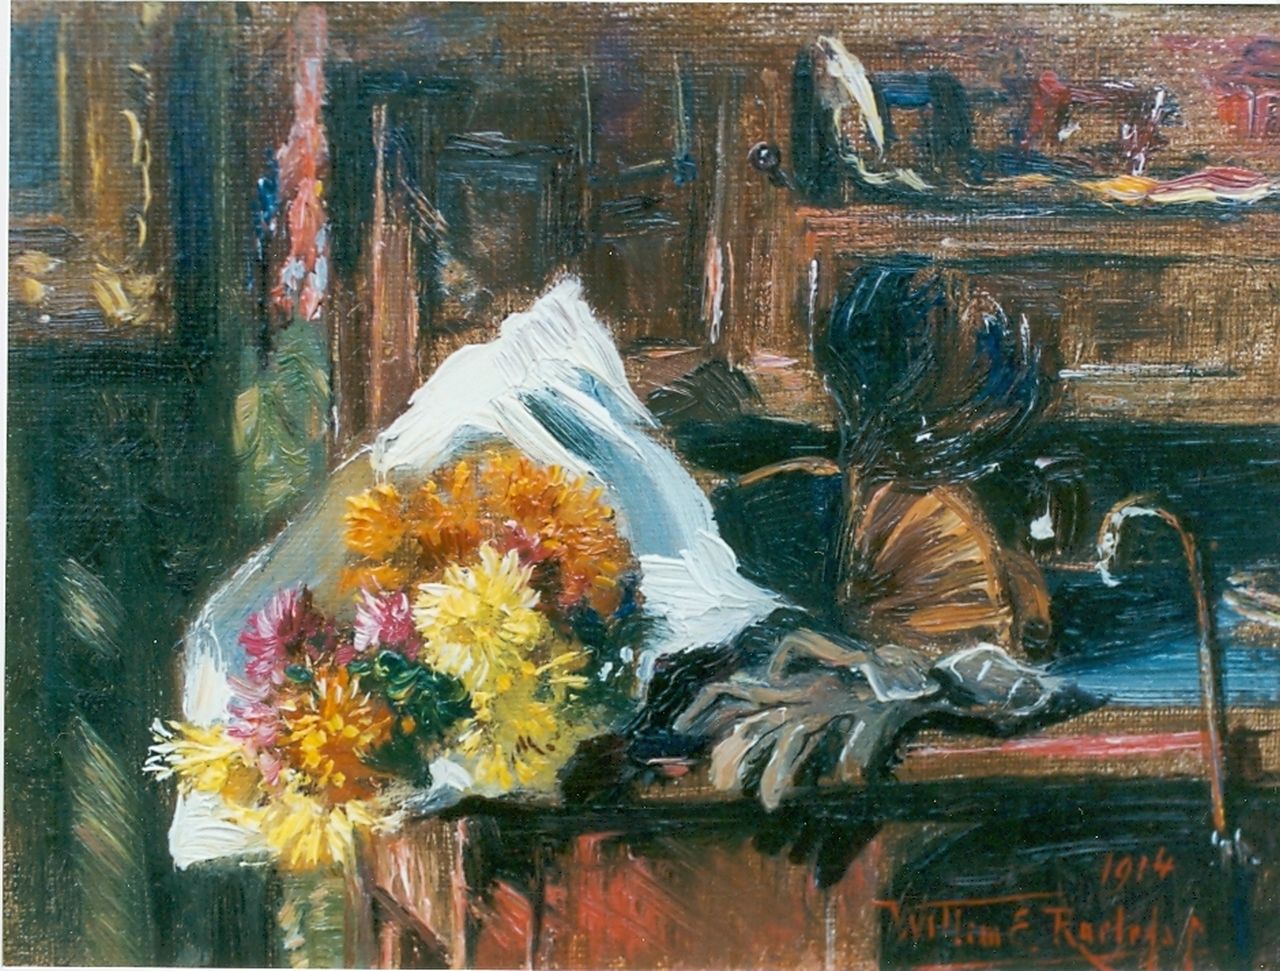 Roelofs jr. W.E.  | Willem Elisa Roelofs jr., Still life with chrysanthemums and gloves, oil on canvas laid down on panel 13.0 x 18.0 cm, signed l.r. and dated 1914